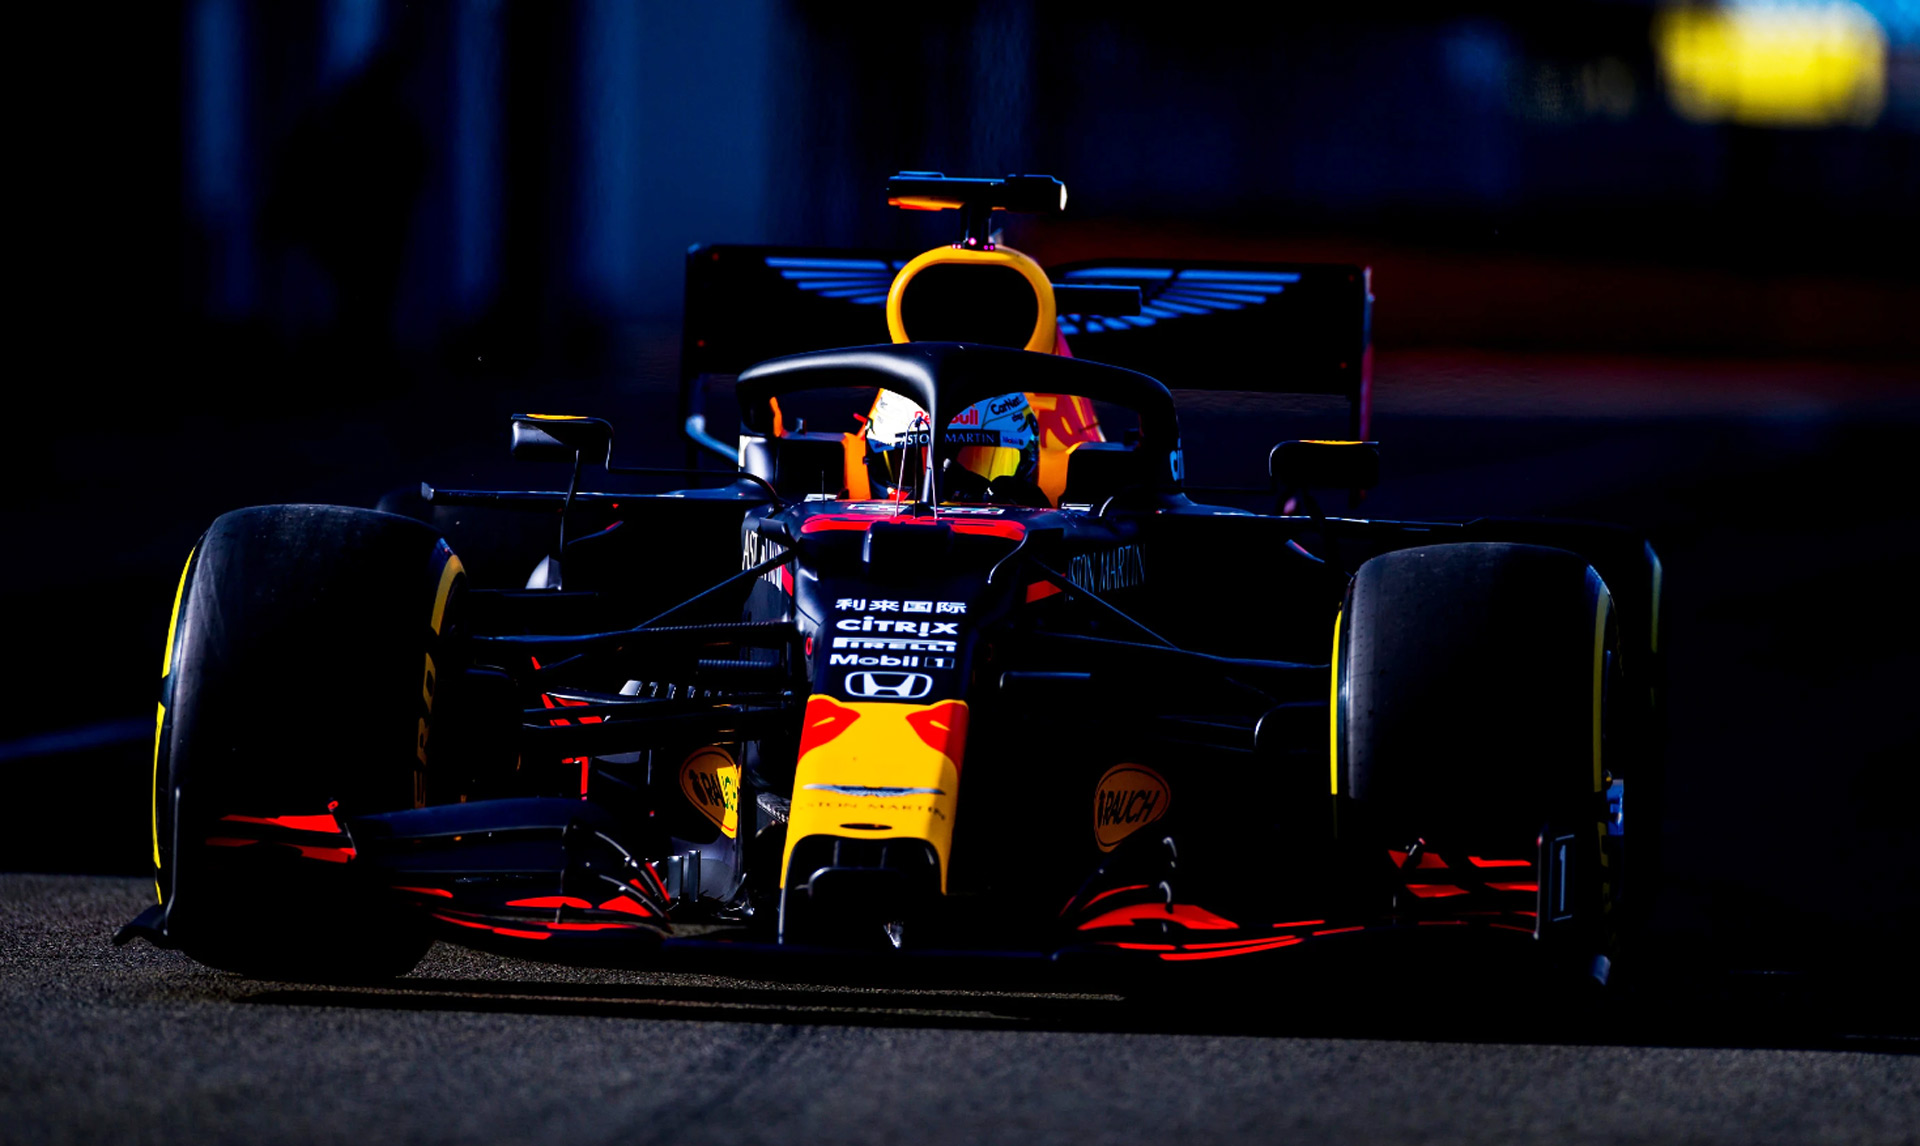 f1-engine-freeze-means-red-bull-racing-can-continue-with-honda-power